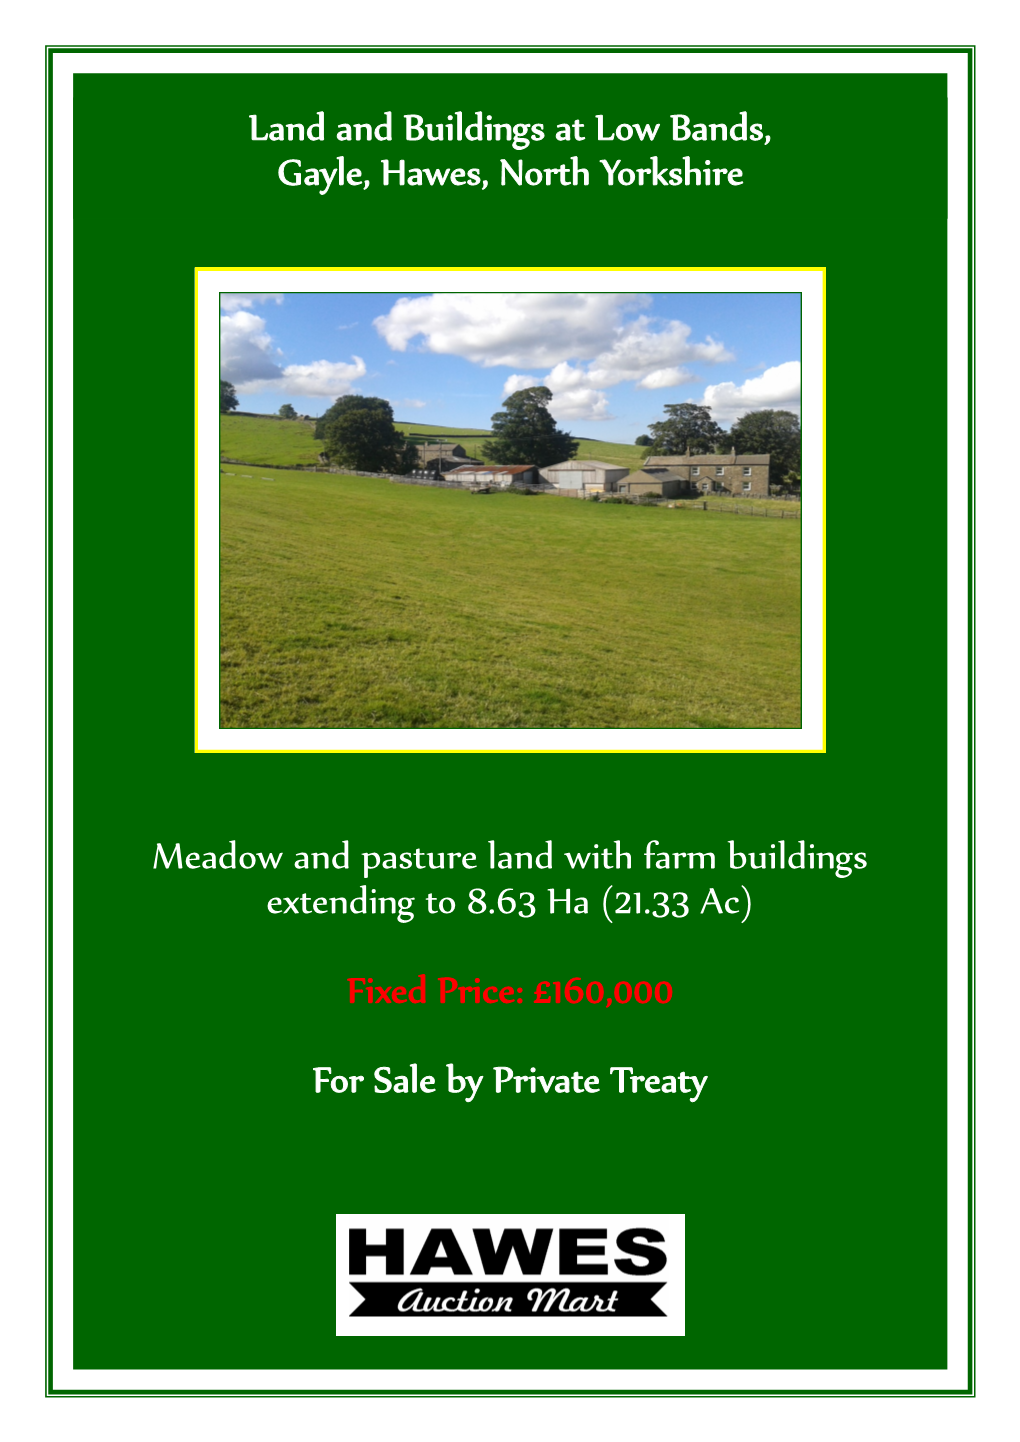 Land and Buildings at Low Bands, Gayle, Hawes, North Yorkshire Meadow and Pasture Land with Farm Buildings Extending to 8.63 H